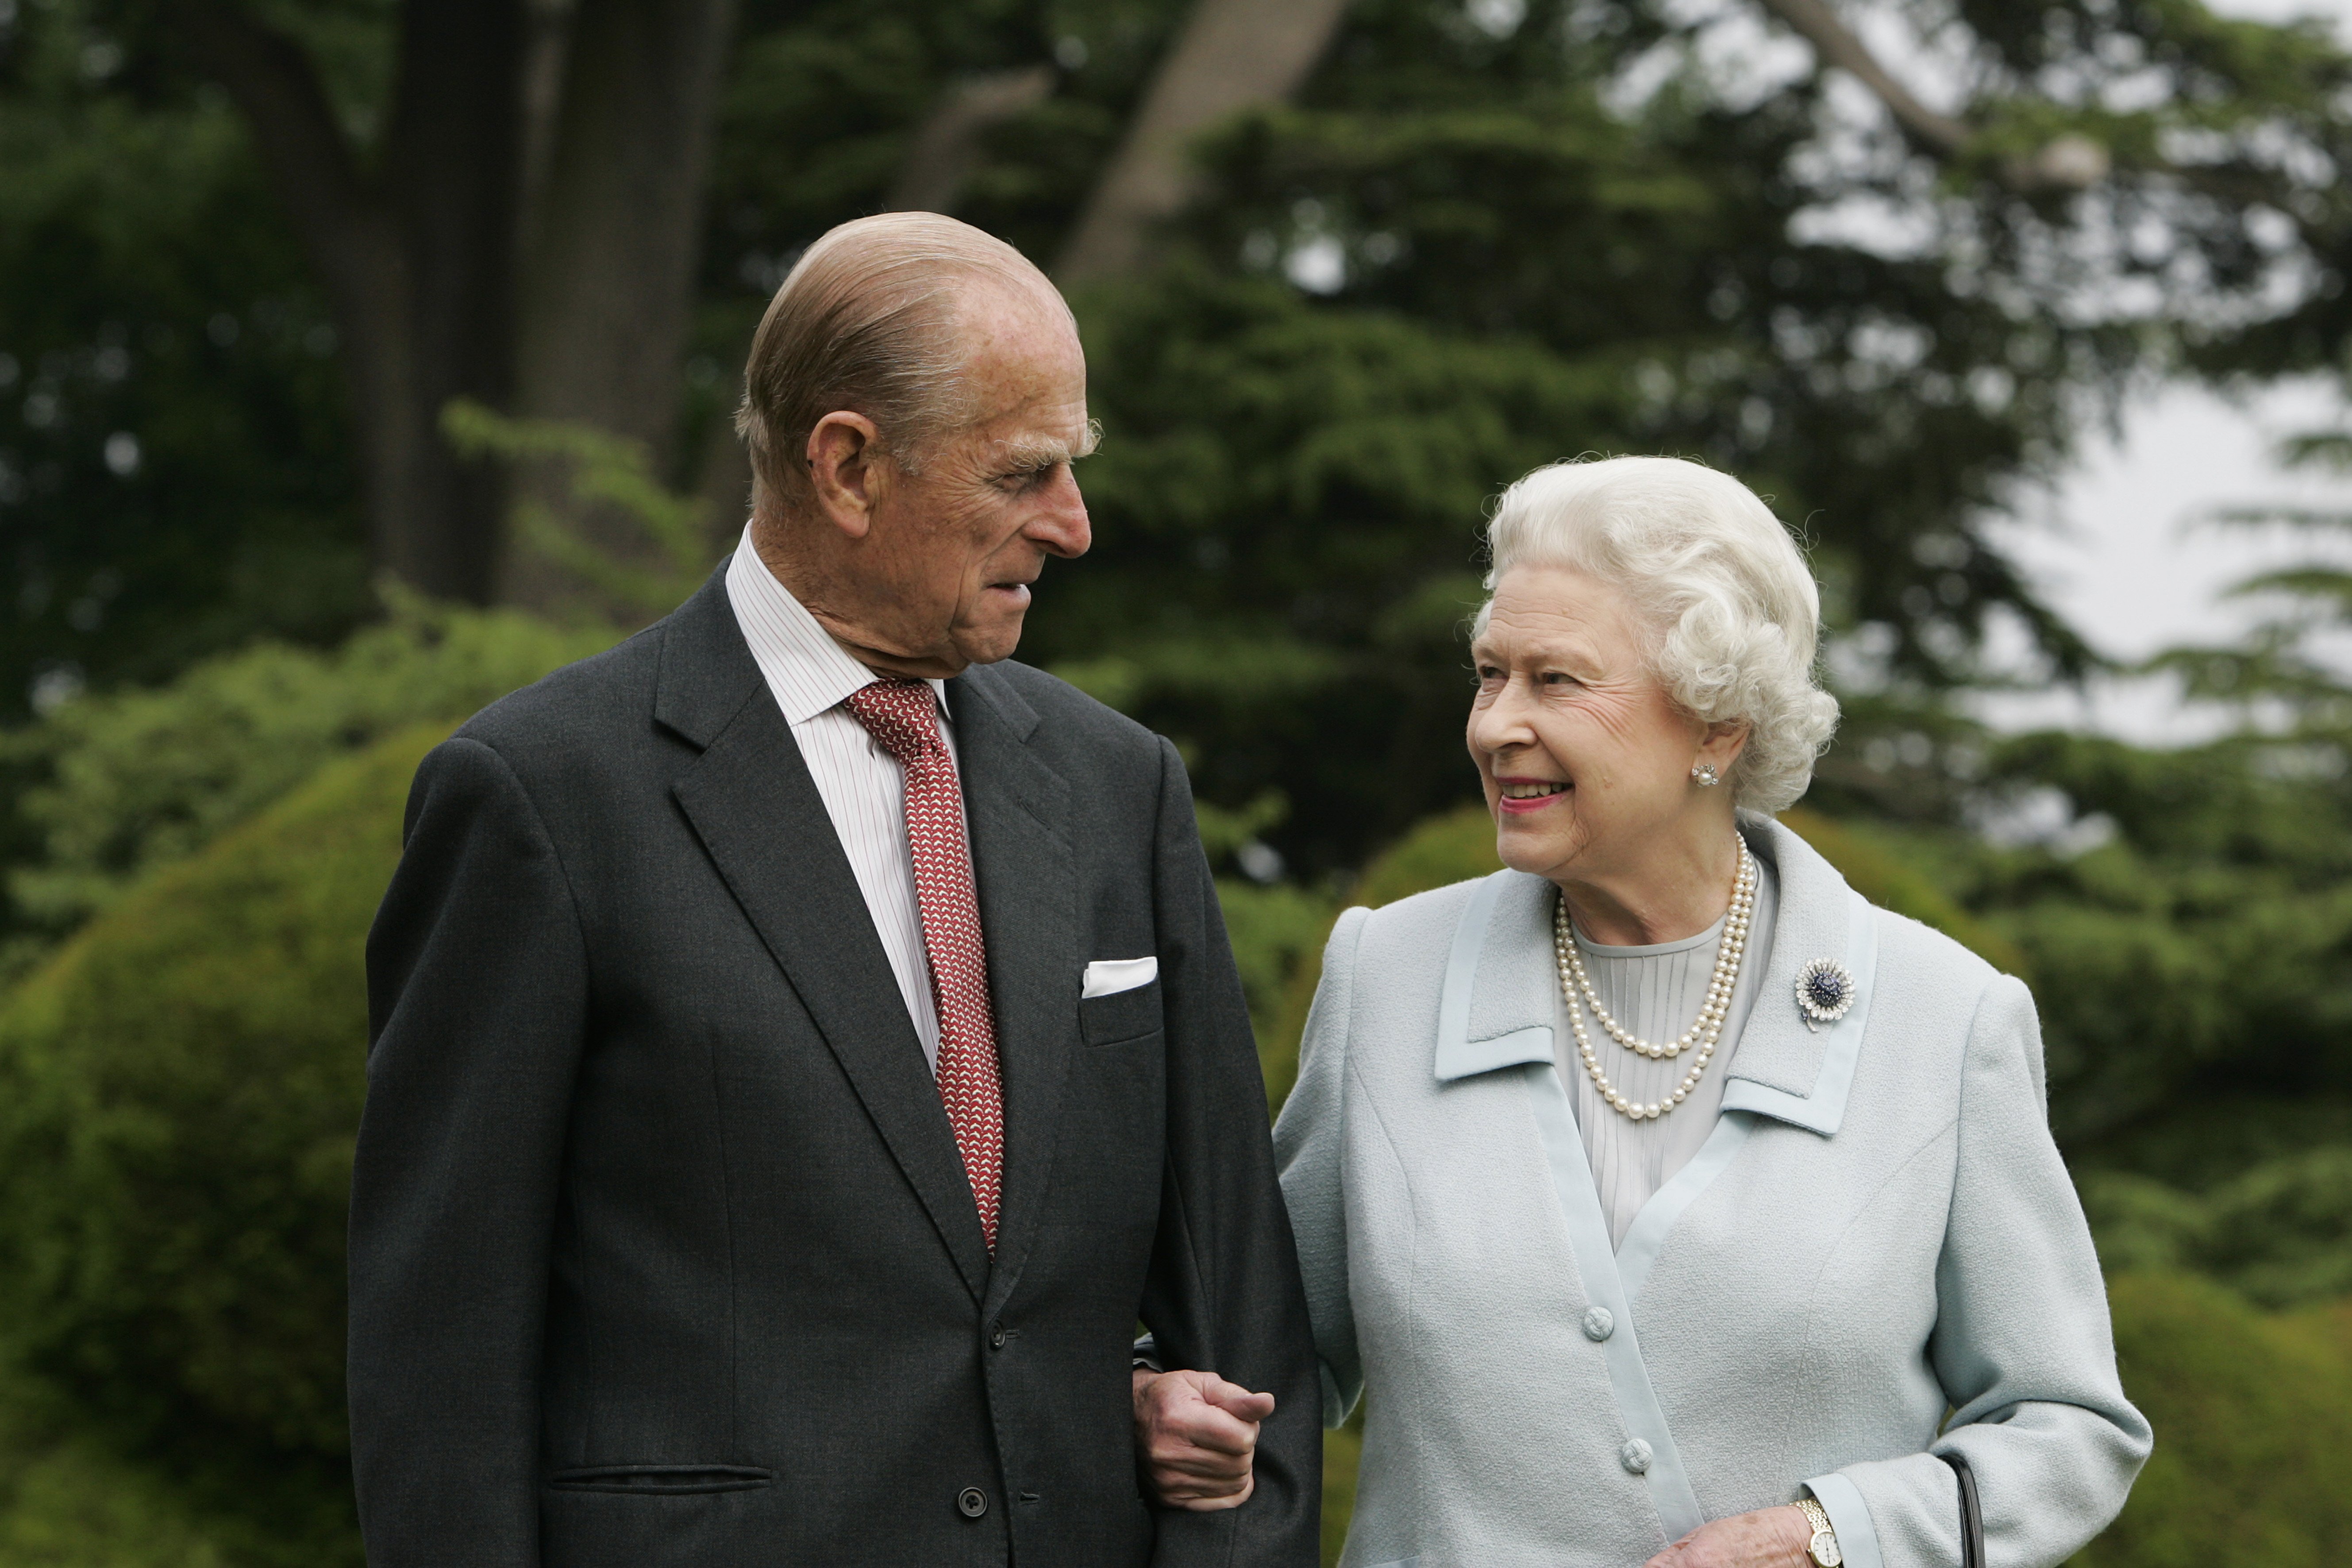 Queen Elizabeth II and Prince Philip, The Duke of Edinburgh celebrating their diamond wedding anniversary on November 18, 2007, in Broadlands, Hampshire. | Source: Getty Images